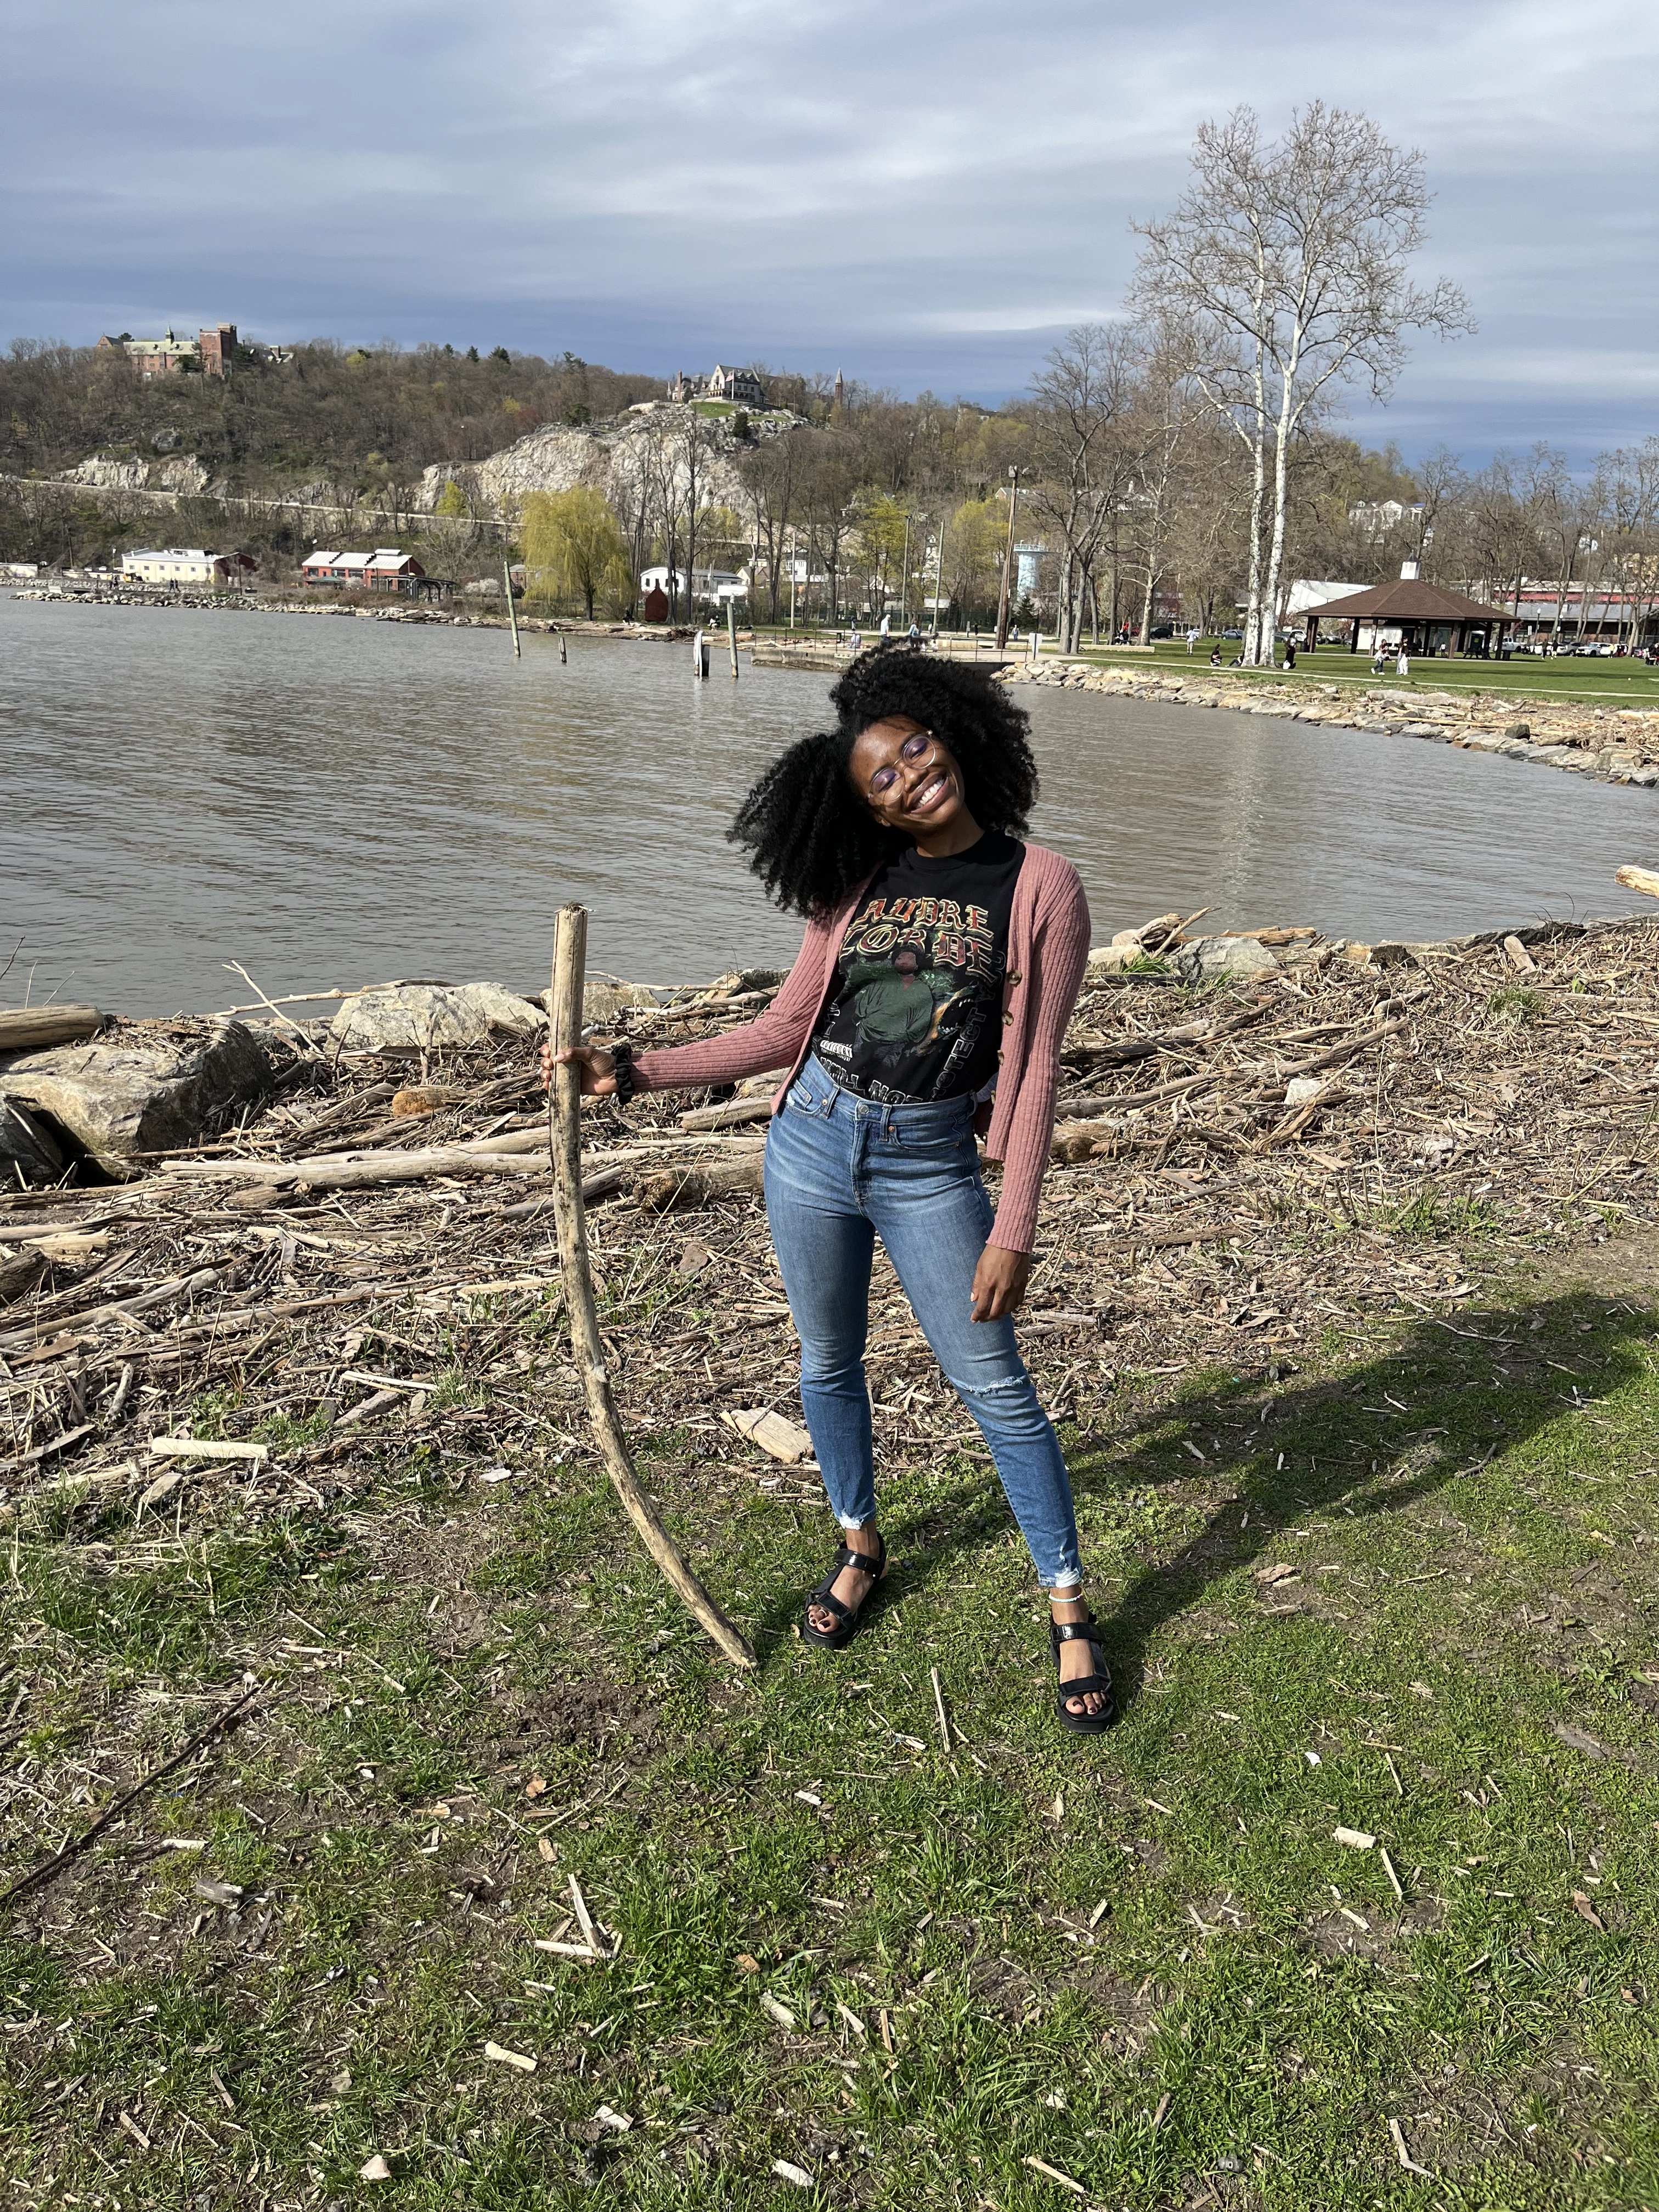 A picture of Dominique, a Black woman wearing jeans and a pink cardigan sweater and a Toni Morrison t-shirt, standing in front of a pond holding a stick.